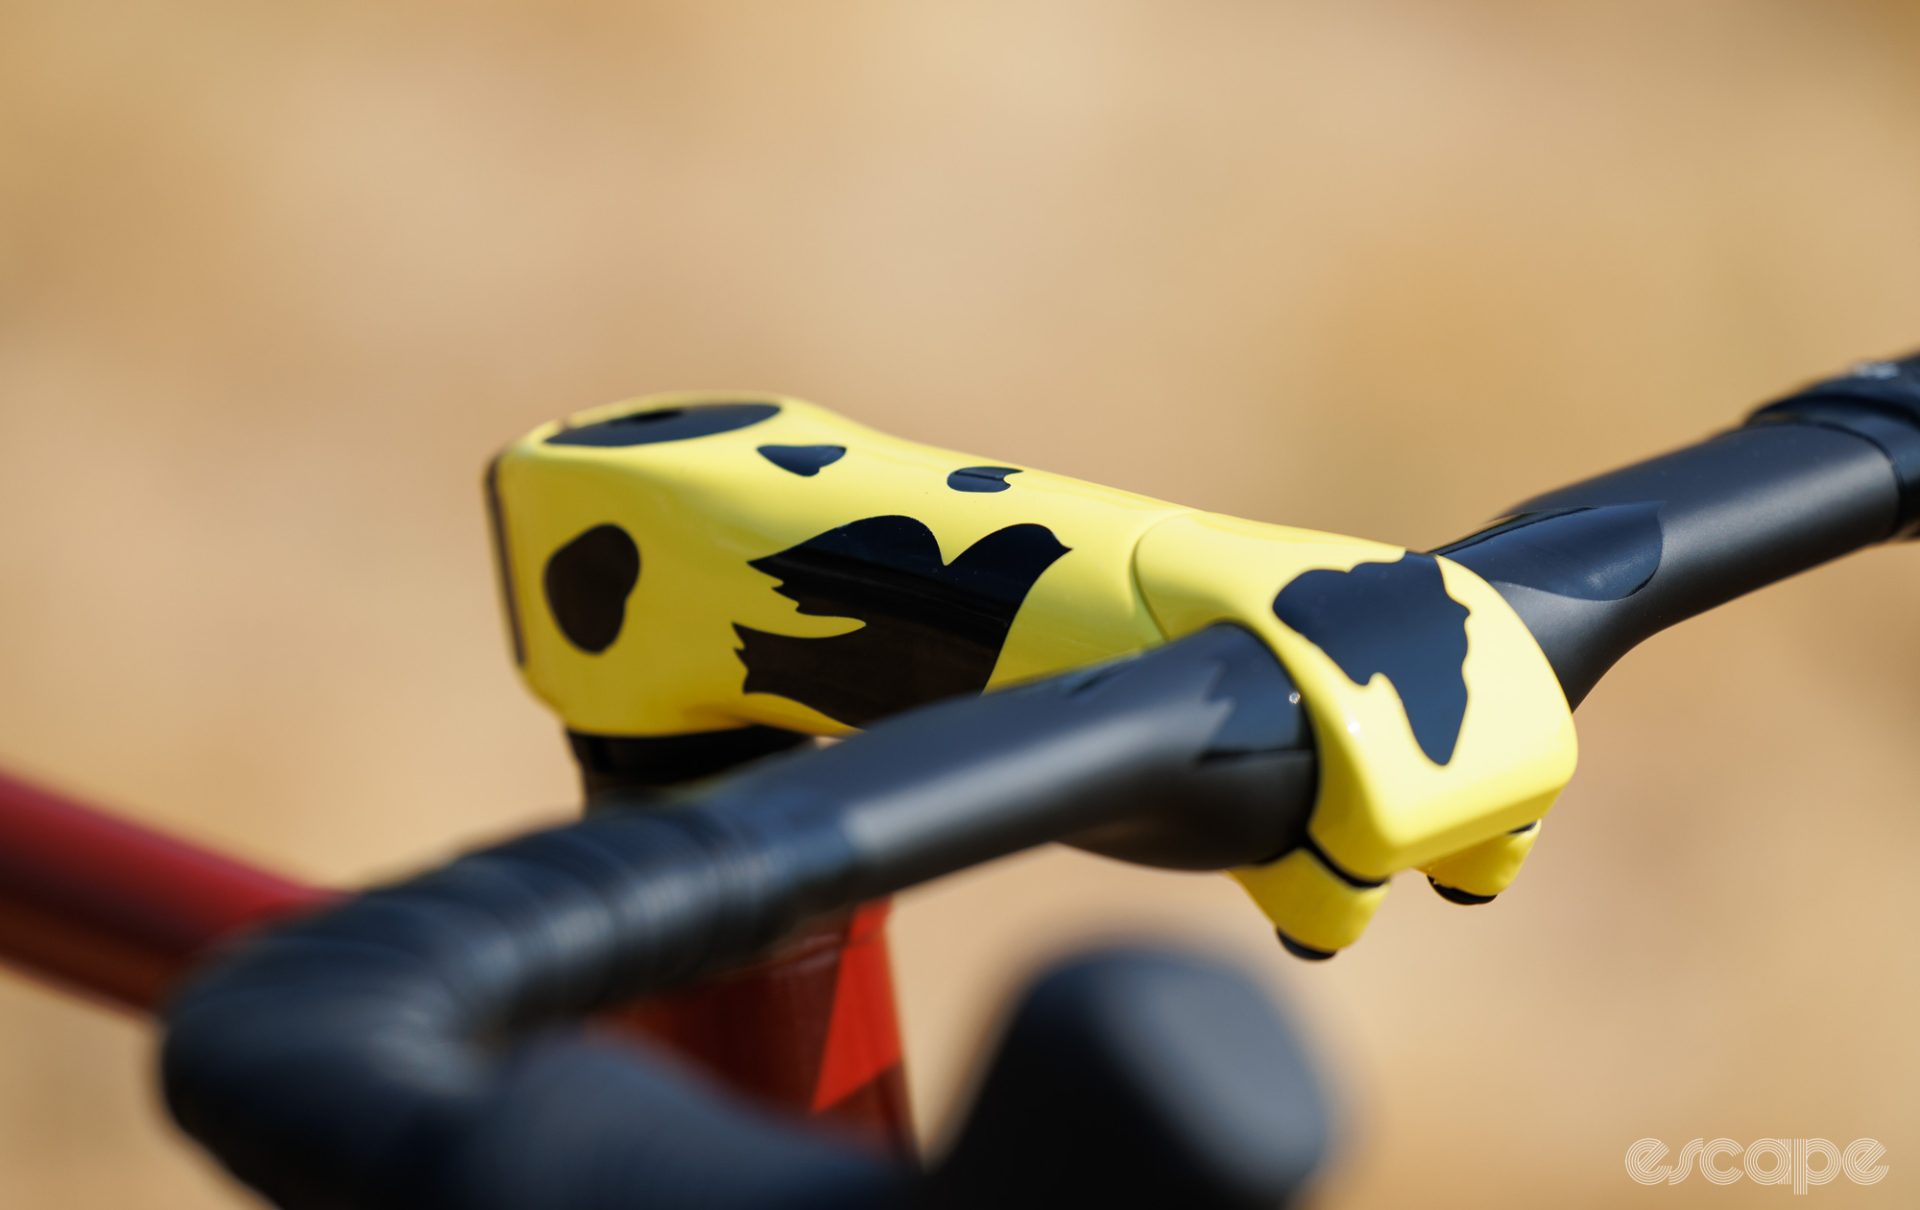 A close look at the Columbus Trittico stem, painted in yellow by Onguza. 